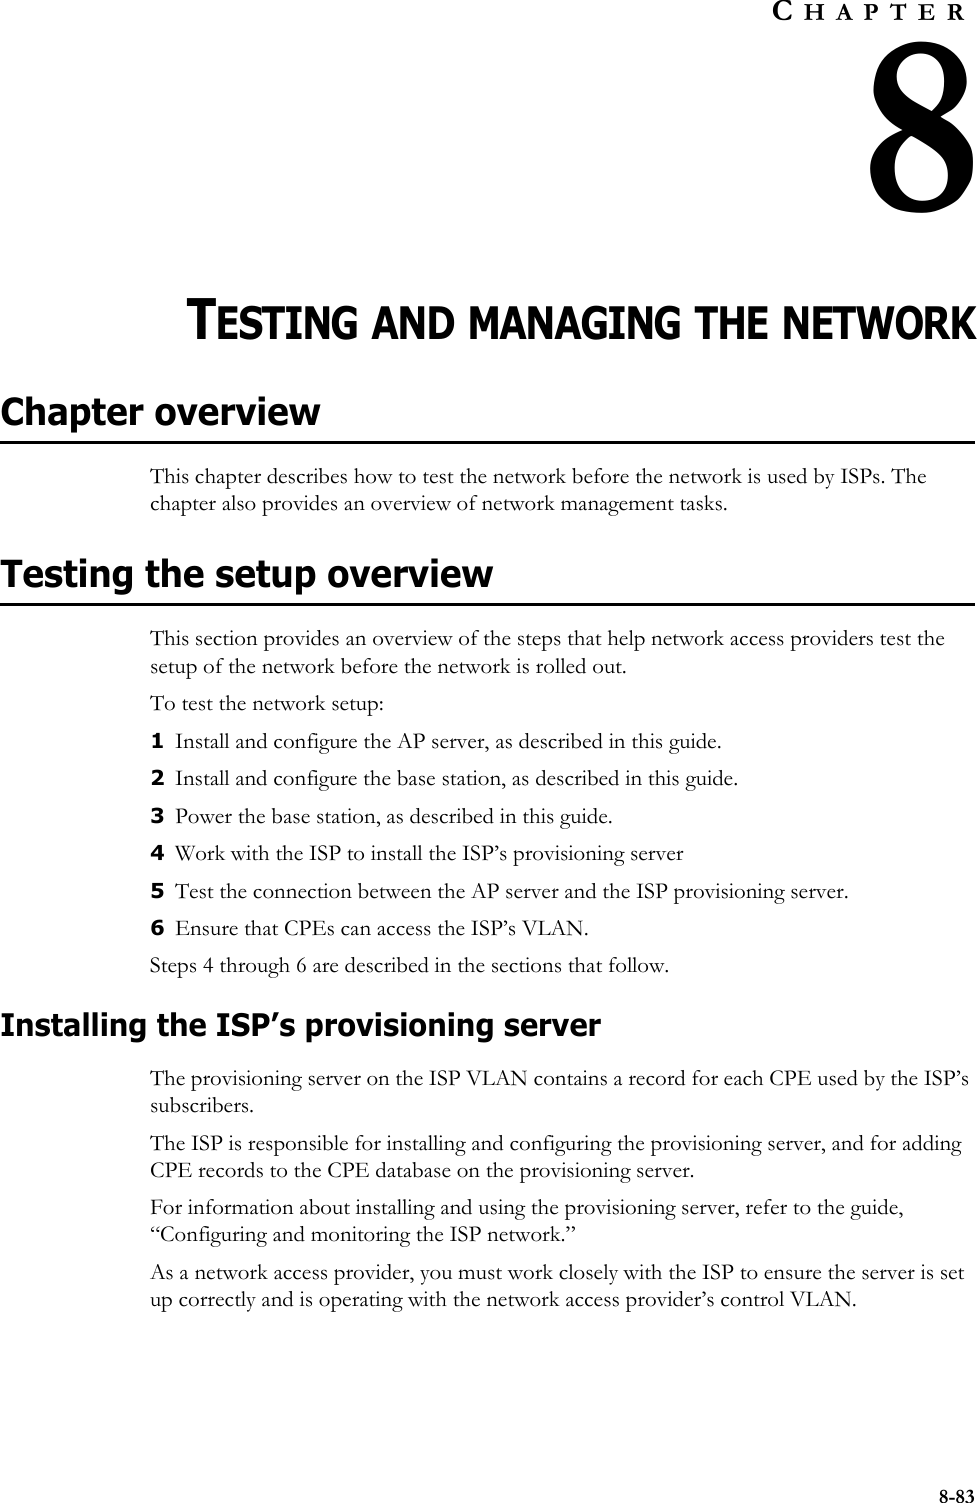 8-83CHAPTER8TESTING AND MANAGING THE NETWORKChapter overviewThis chapter describes how to test the network before the network is used by ISPs. The chapter also provides an overview of network management tasks. Testing the setup overviewThis section provides an overview of the steps that help network access providers test the setup of the network before the network is rolled out.To test the network setup:1Install and configure the AP server, as described in this guide.2Install and configure the base station, as described in this guide.3Power the base station, as described in this guide. 4Work with the ISP to install the ISP’s provisioning server5Test the connection between the AP server and the ISP provisioning server.6Ensure that CPEs can access the ISP’s VLAN.Steps 4 through 6 are described in the sections that follow.Installing the ISP’s provisioning serverThe provisioning server on the ISP VLAN contains a record for each CPE used by the ISP’s subscribers. The ISP is responsible for installing and configuring the provisioning server, and for adding CPE records to the CPE database on the provisioning server. For information about installing and using the provisioning server, refer to the guide, “Configuring and monitoring the ISP network.” As a network access provider, you must work closely with the ISP to ensure the server is set up correctly and is operating with the network access provider’s control VLAN.